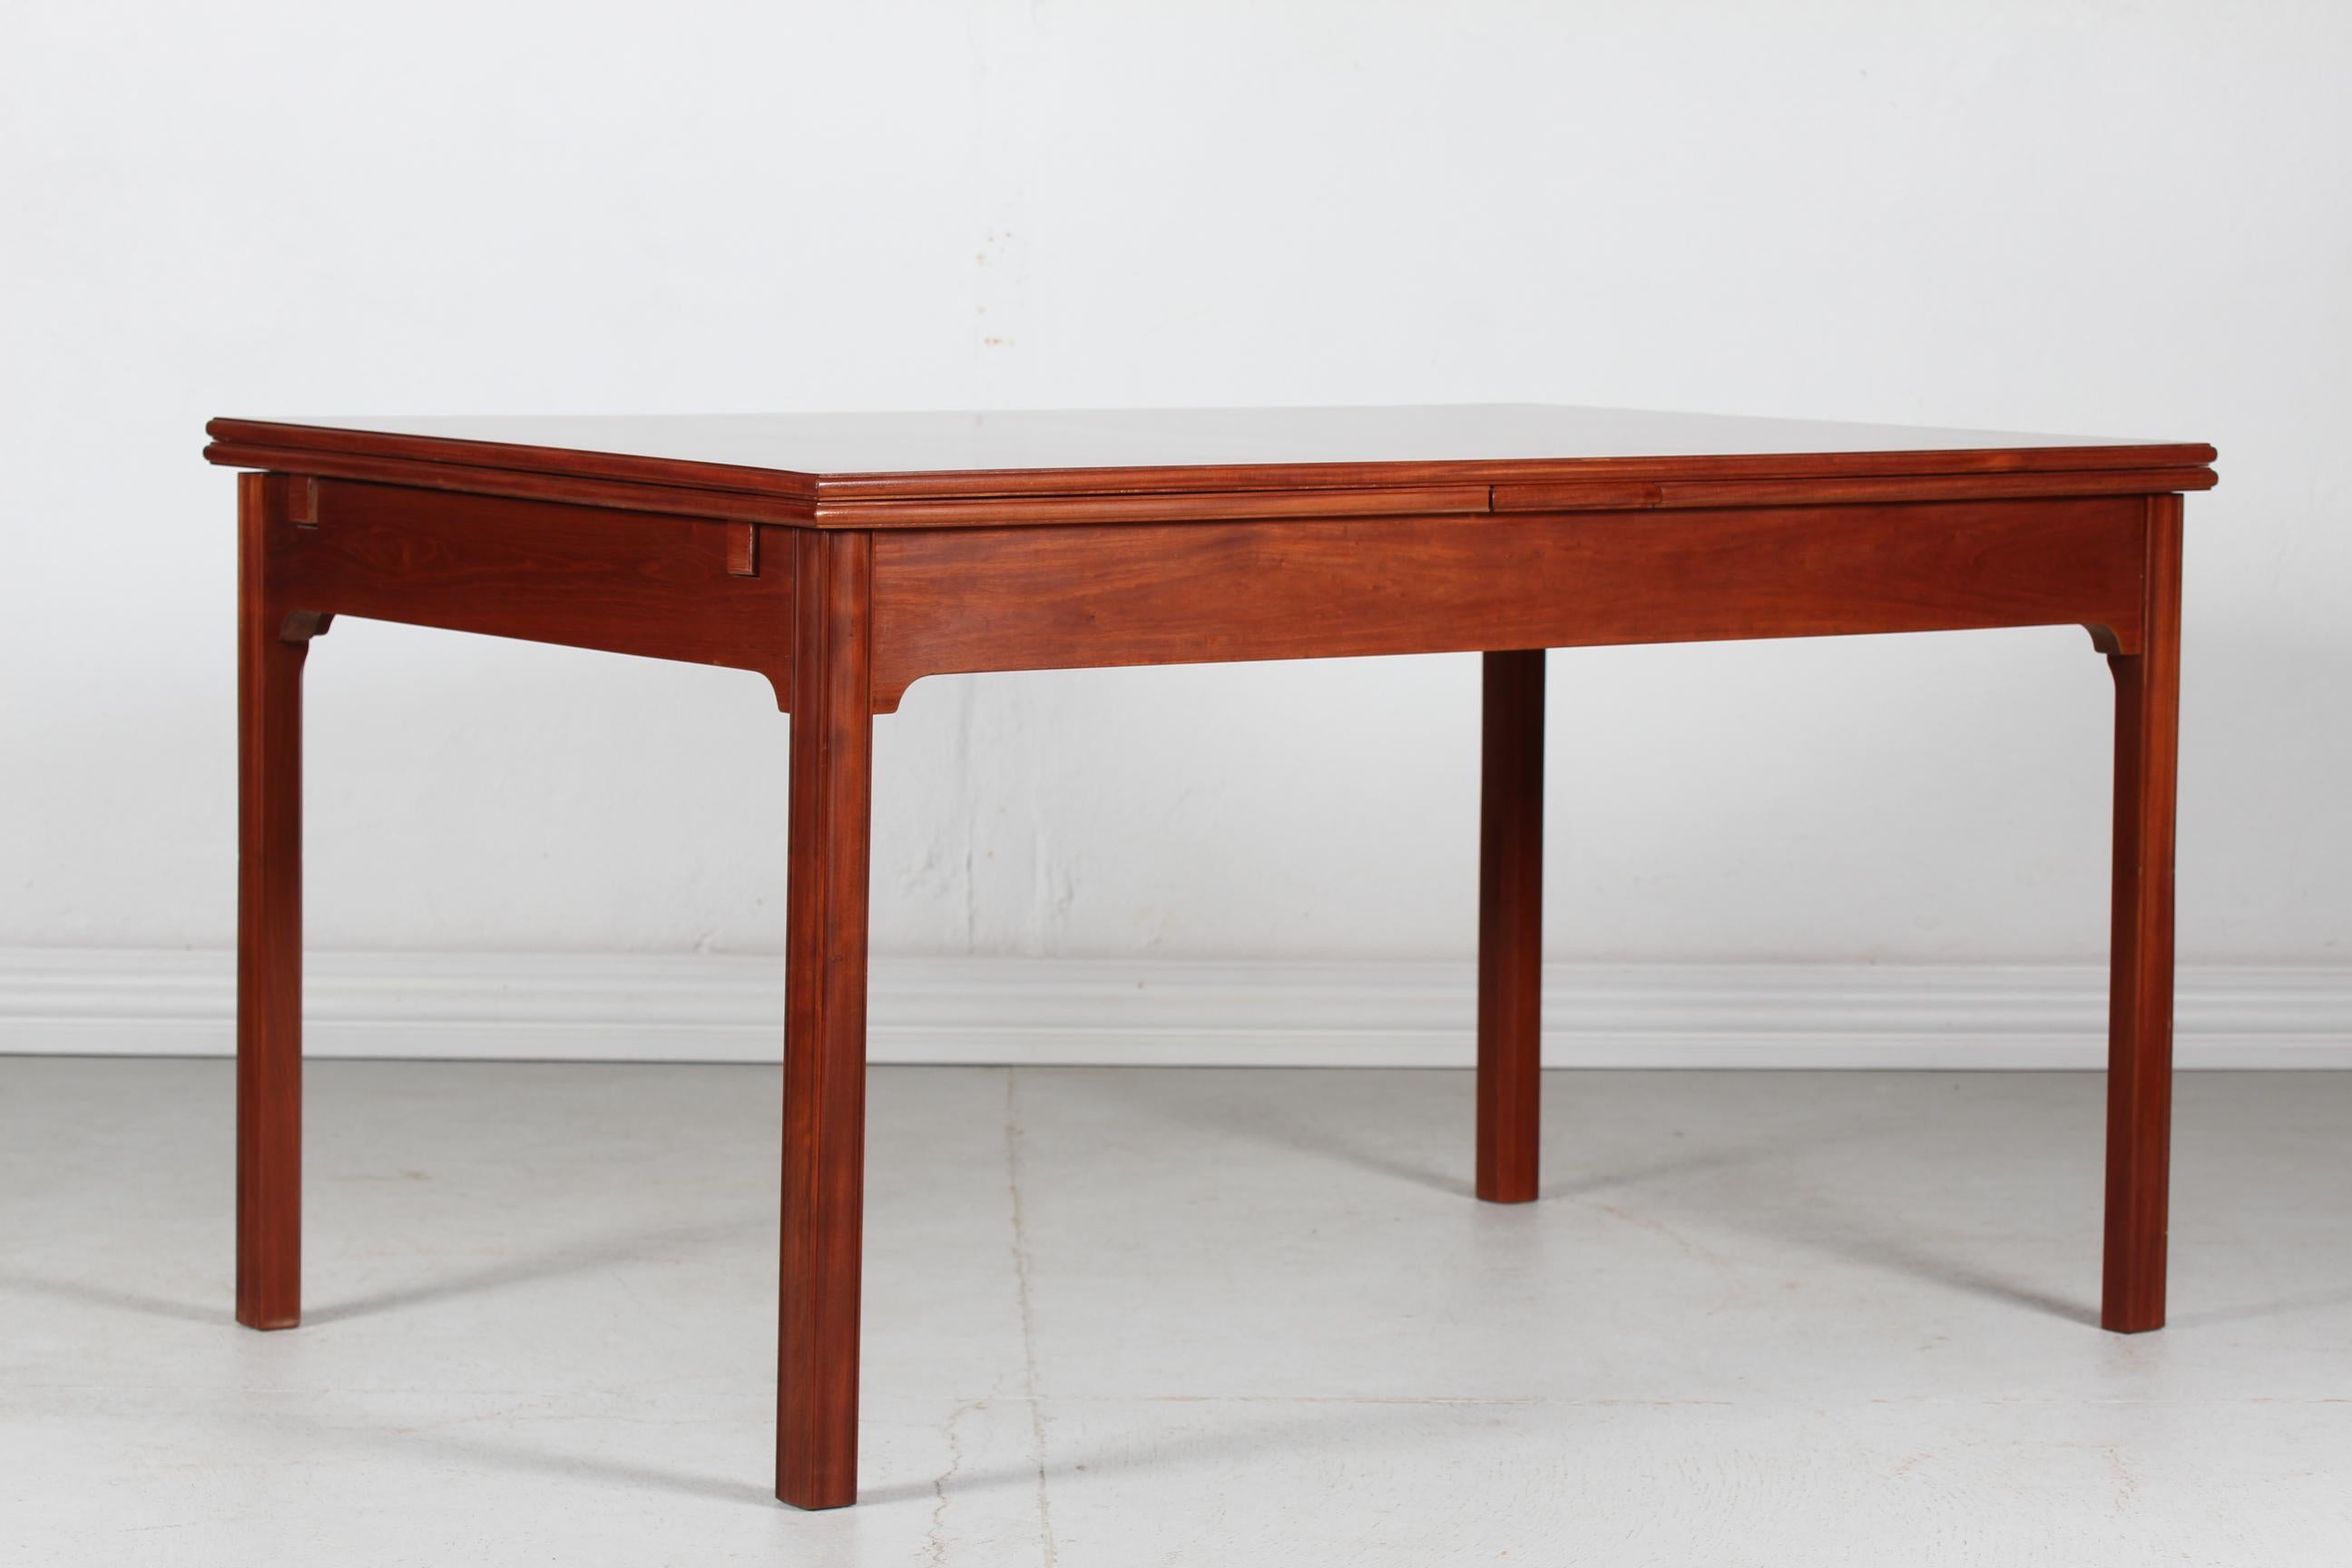 Vintage dining table model no. 4229 by the Danish architect and furniture designer Kaare Klint (1888-1954) 
Manufactured by Rud Rasmussen in the 1950s in Copenhagen.
The classic table is made of mahogany with lacquer, Two pull-out-leaves make